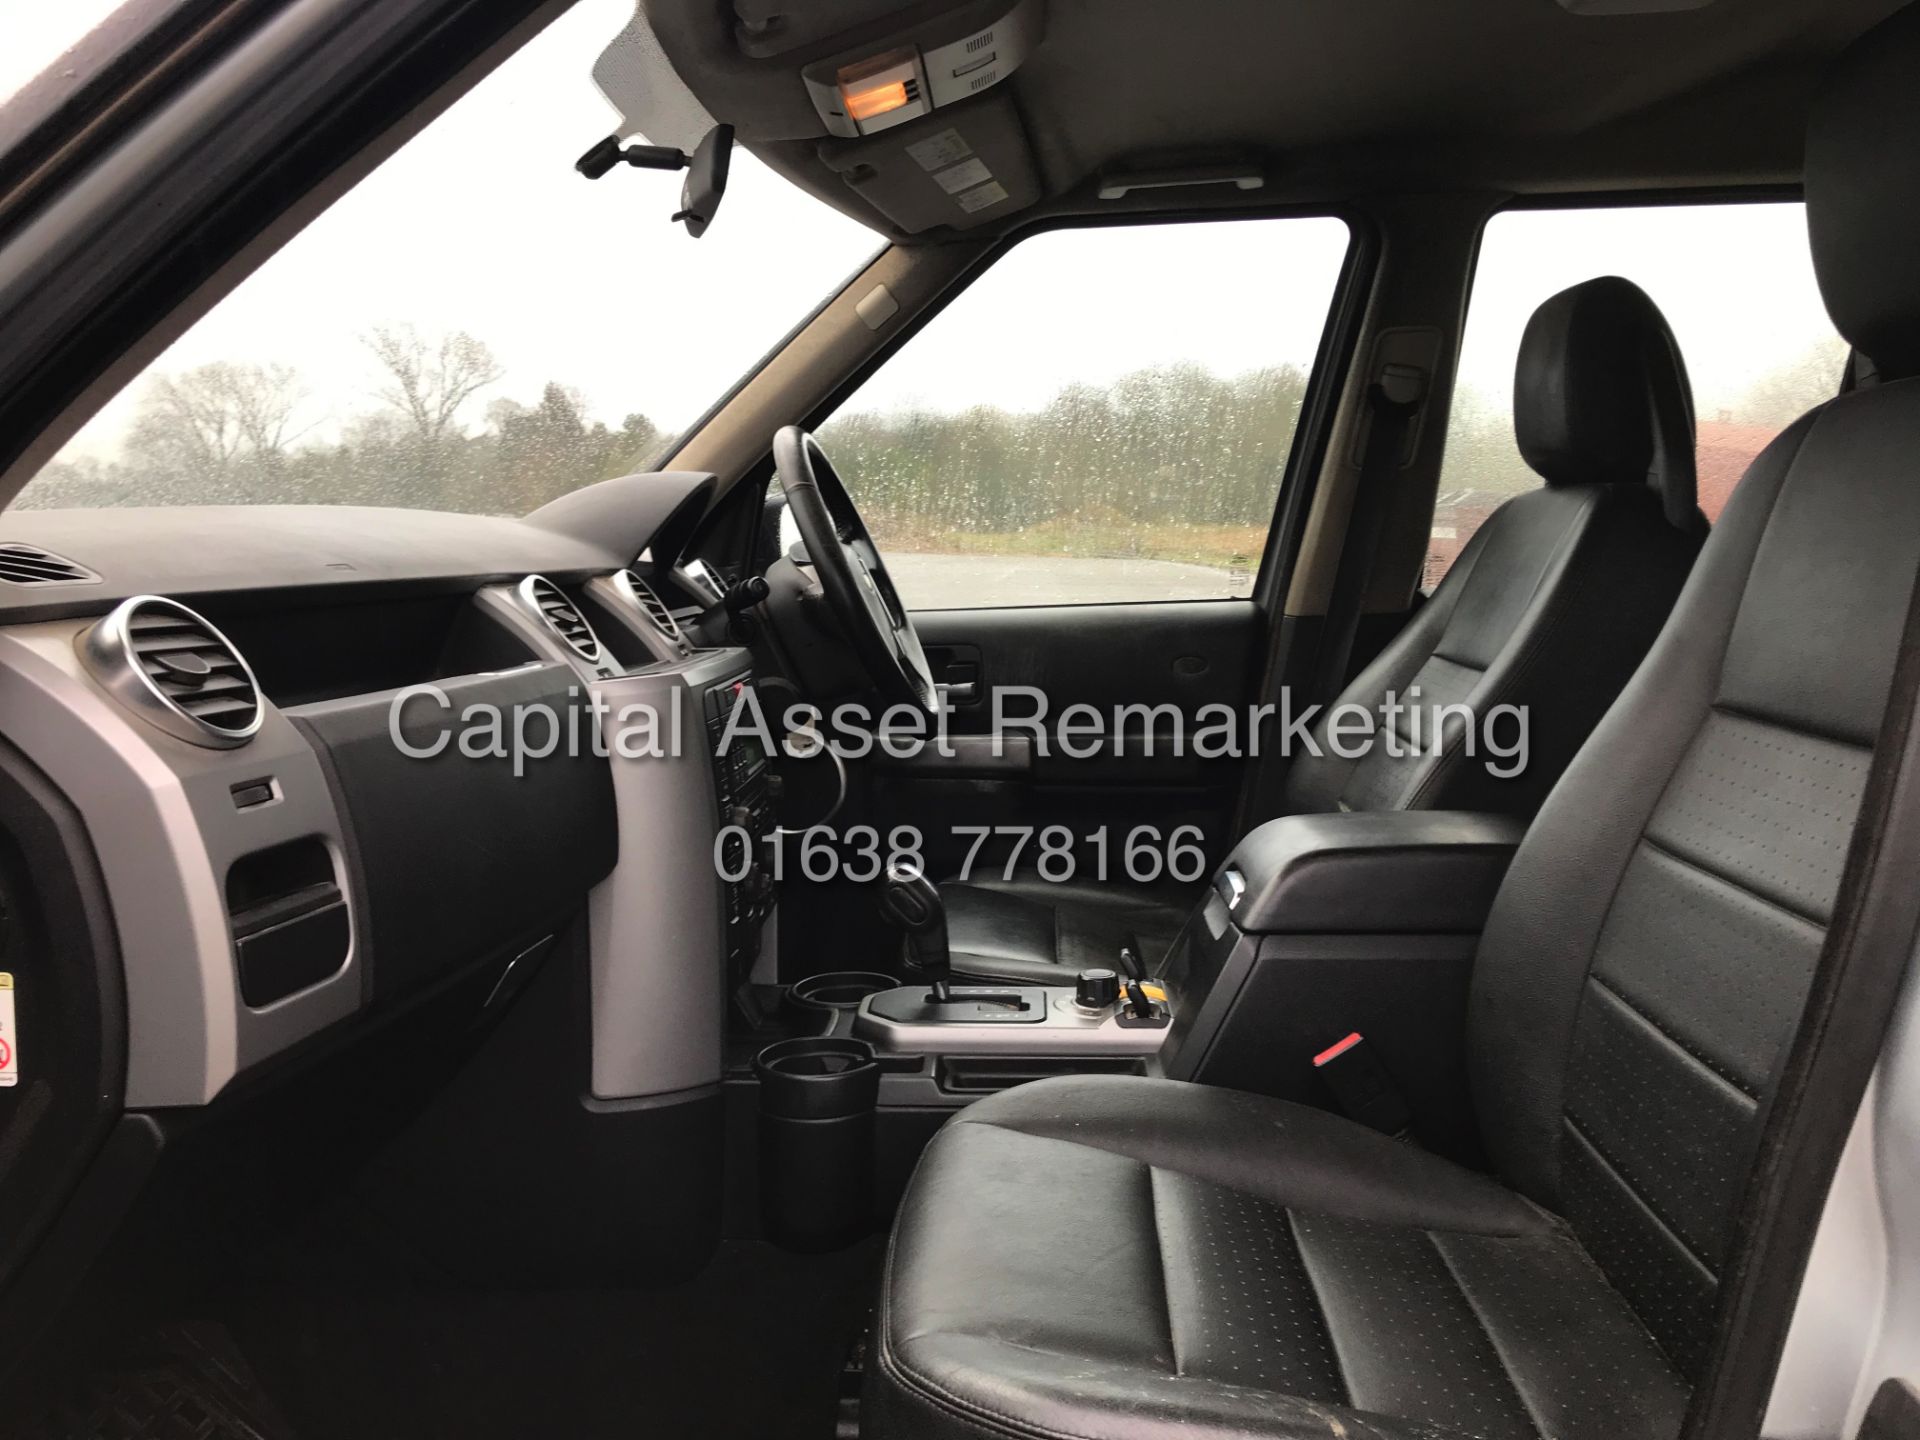 (ON SALE) LANDROVER DISCOVERY 3 "TDV6 2.7 AUTO - 59 REG - LEATHER - GREAT SPEC - 7 SEATER - WOW!!! - Image 10 of 17